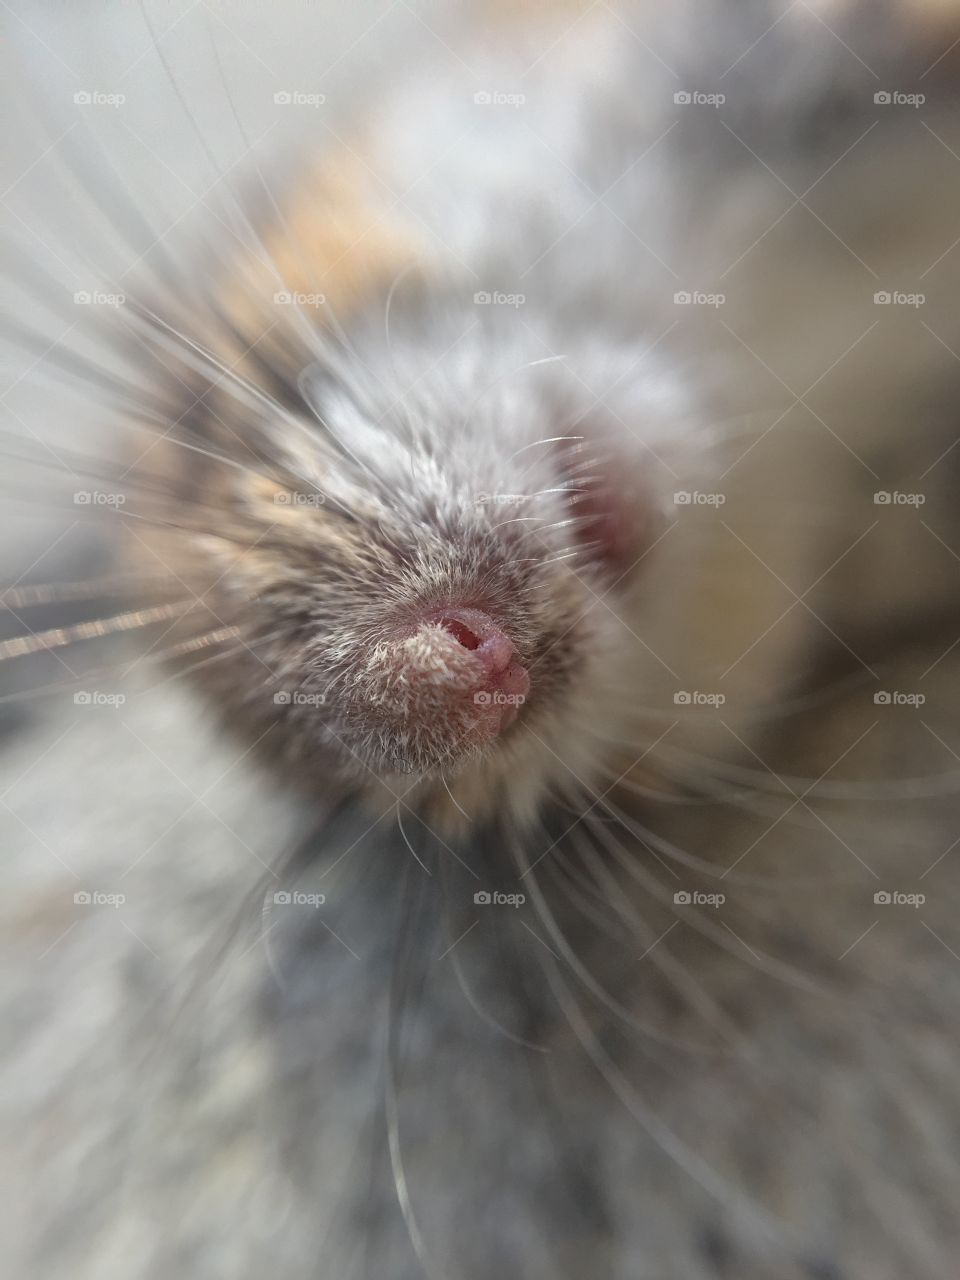 Macro mouse nose and whiskers